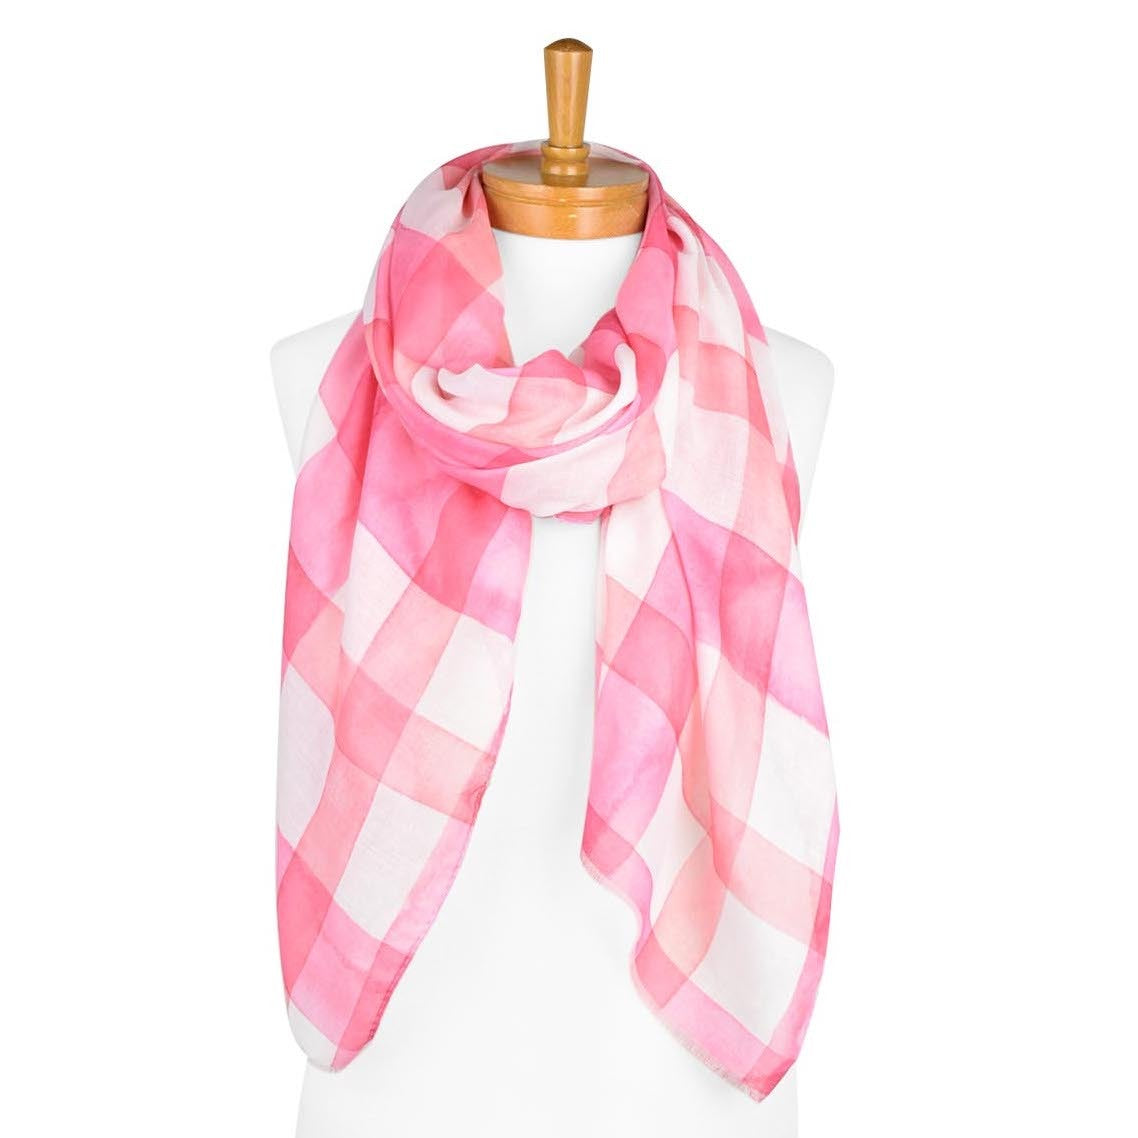 Gingham patterned Scarf